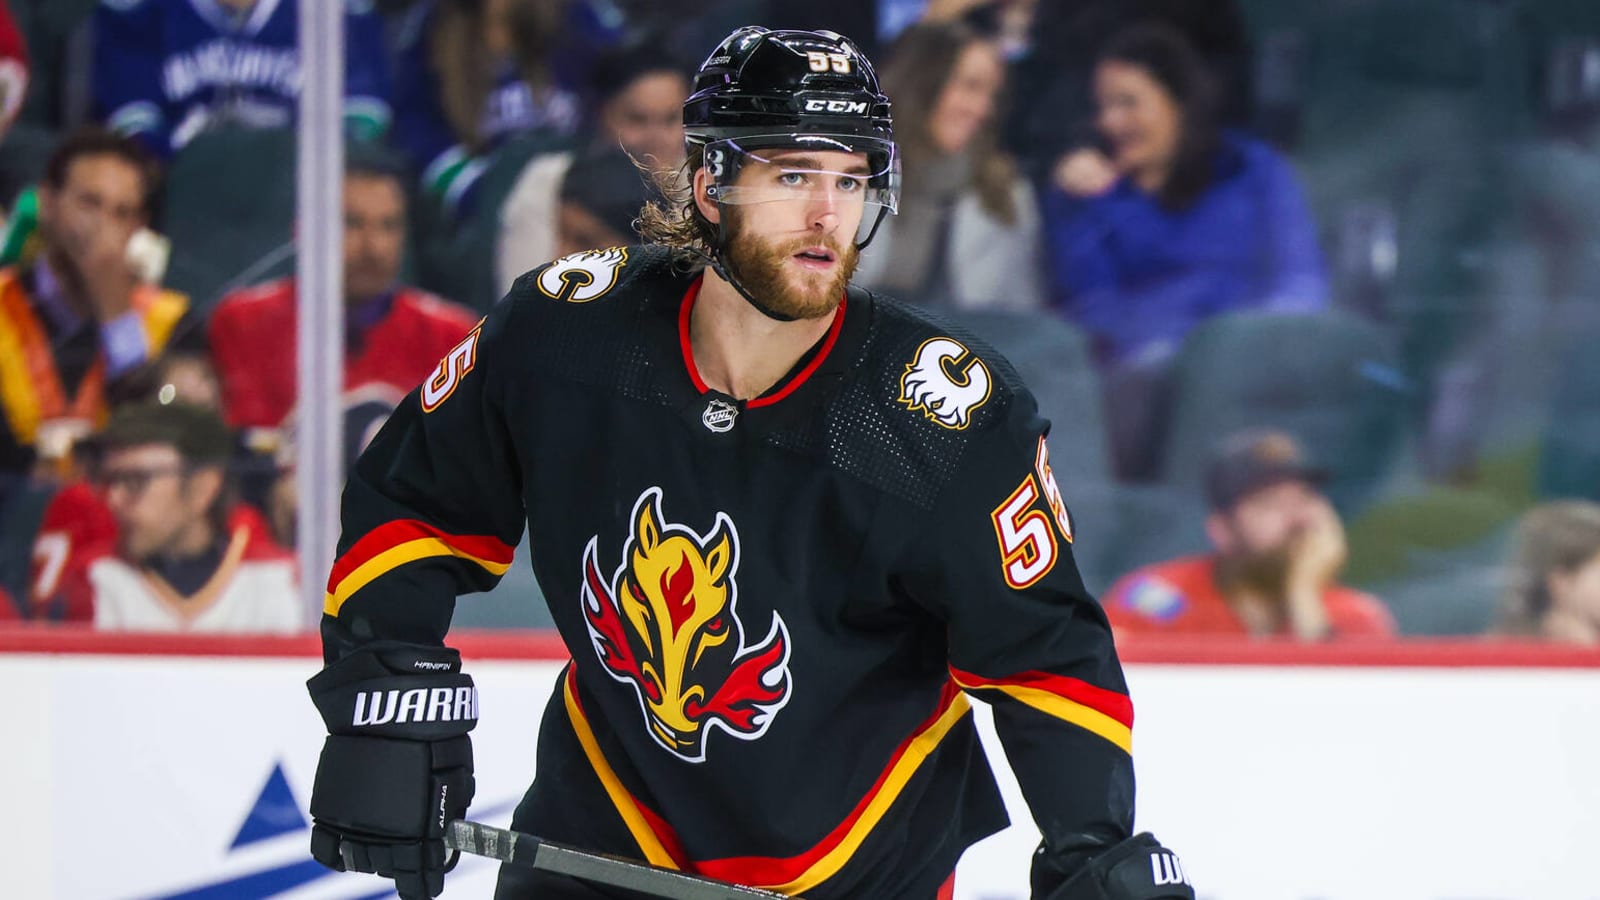 Flames may execute sign-and-trade with high-profile defenseman